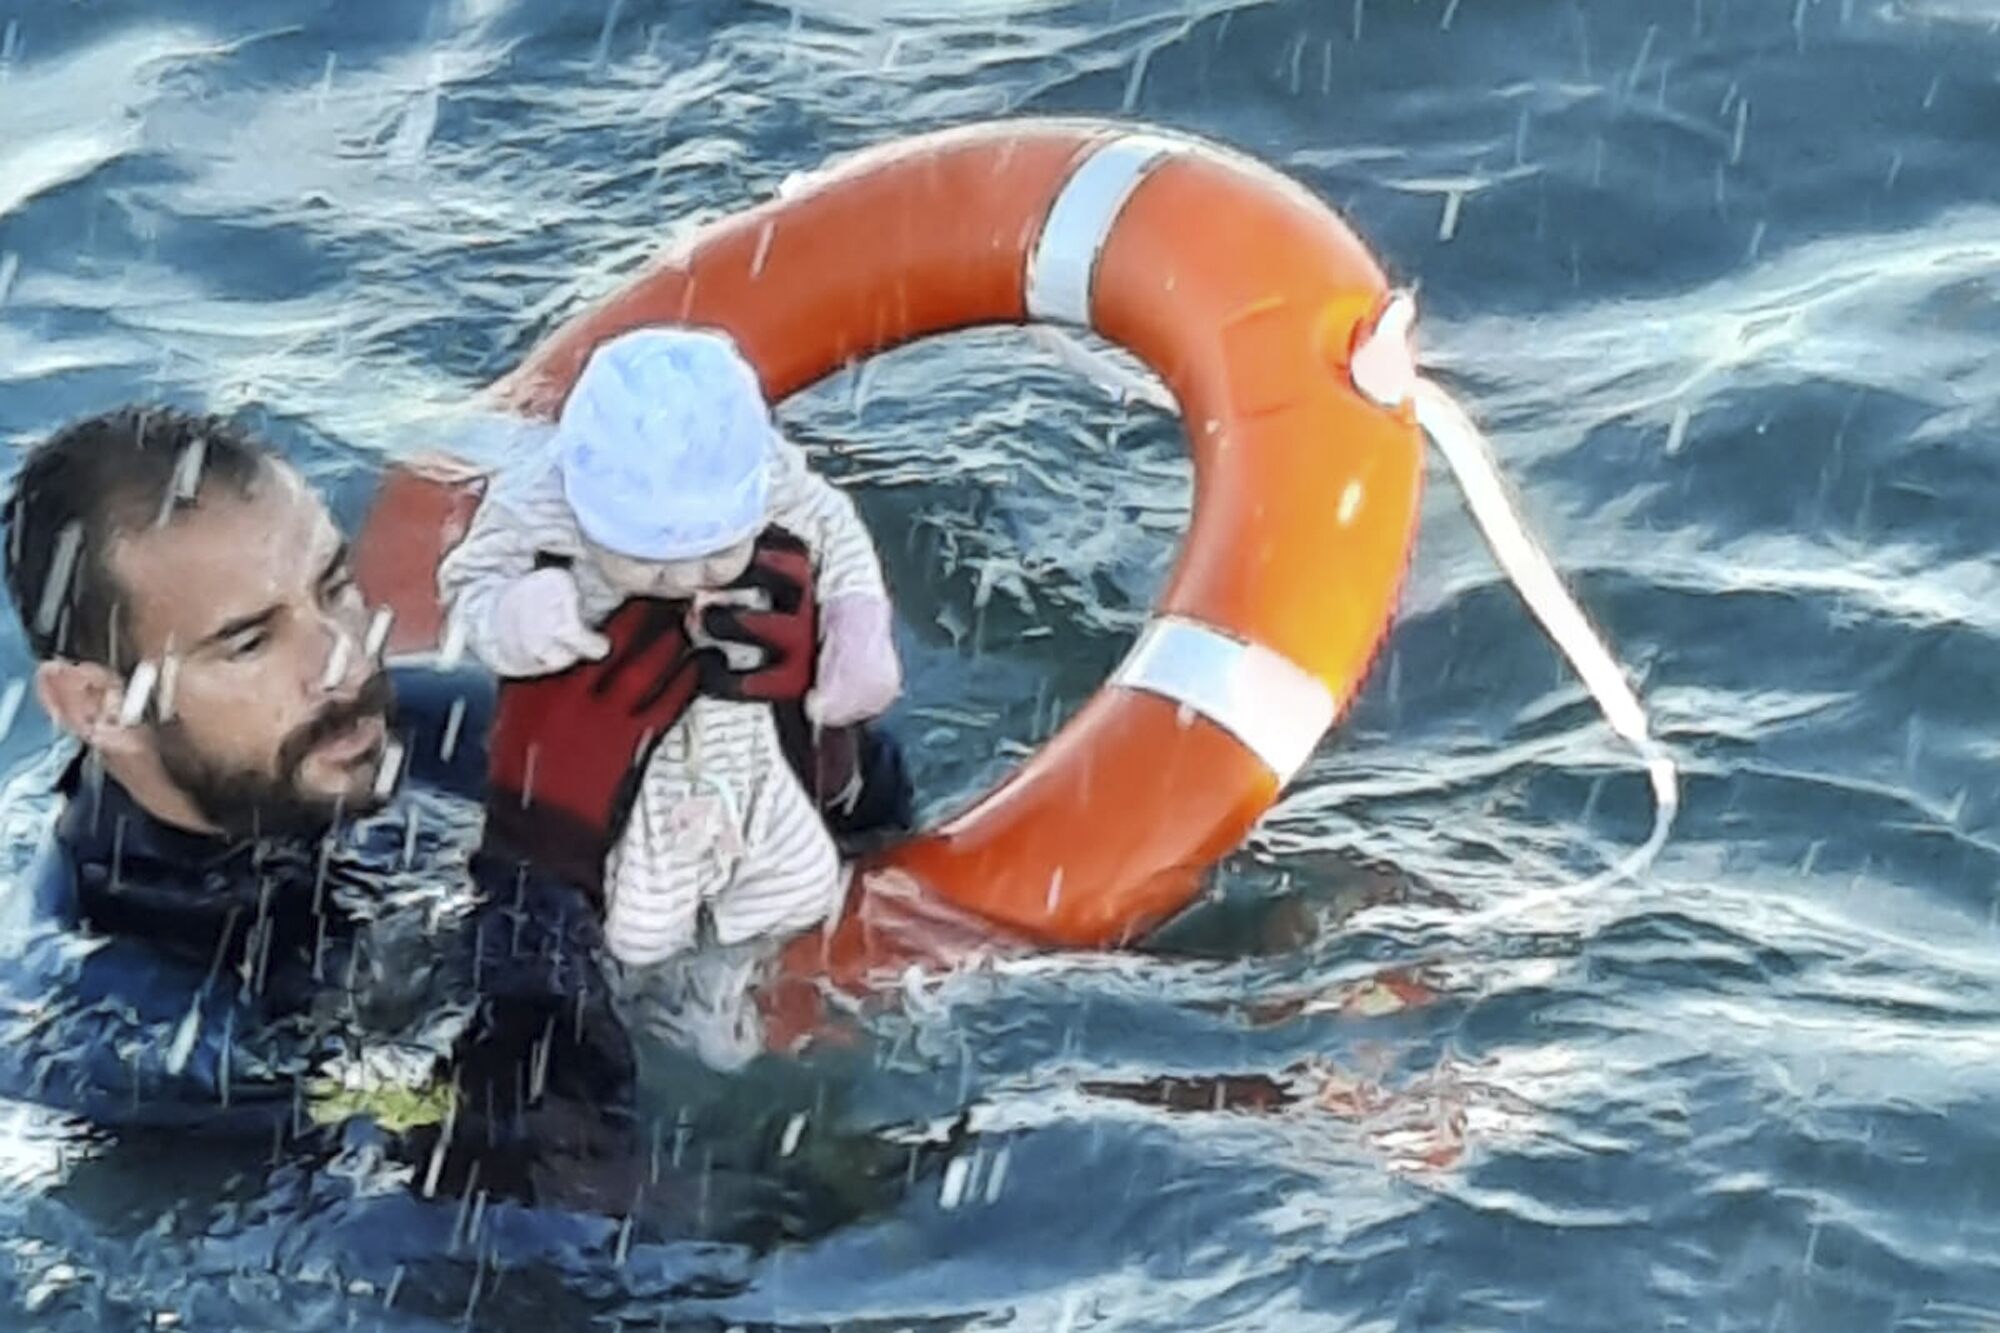 A man holds up a baby in both hands while floating in the sea on an orange life preserver ring